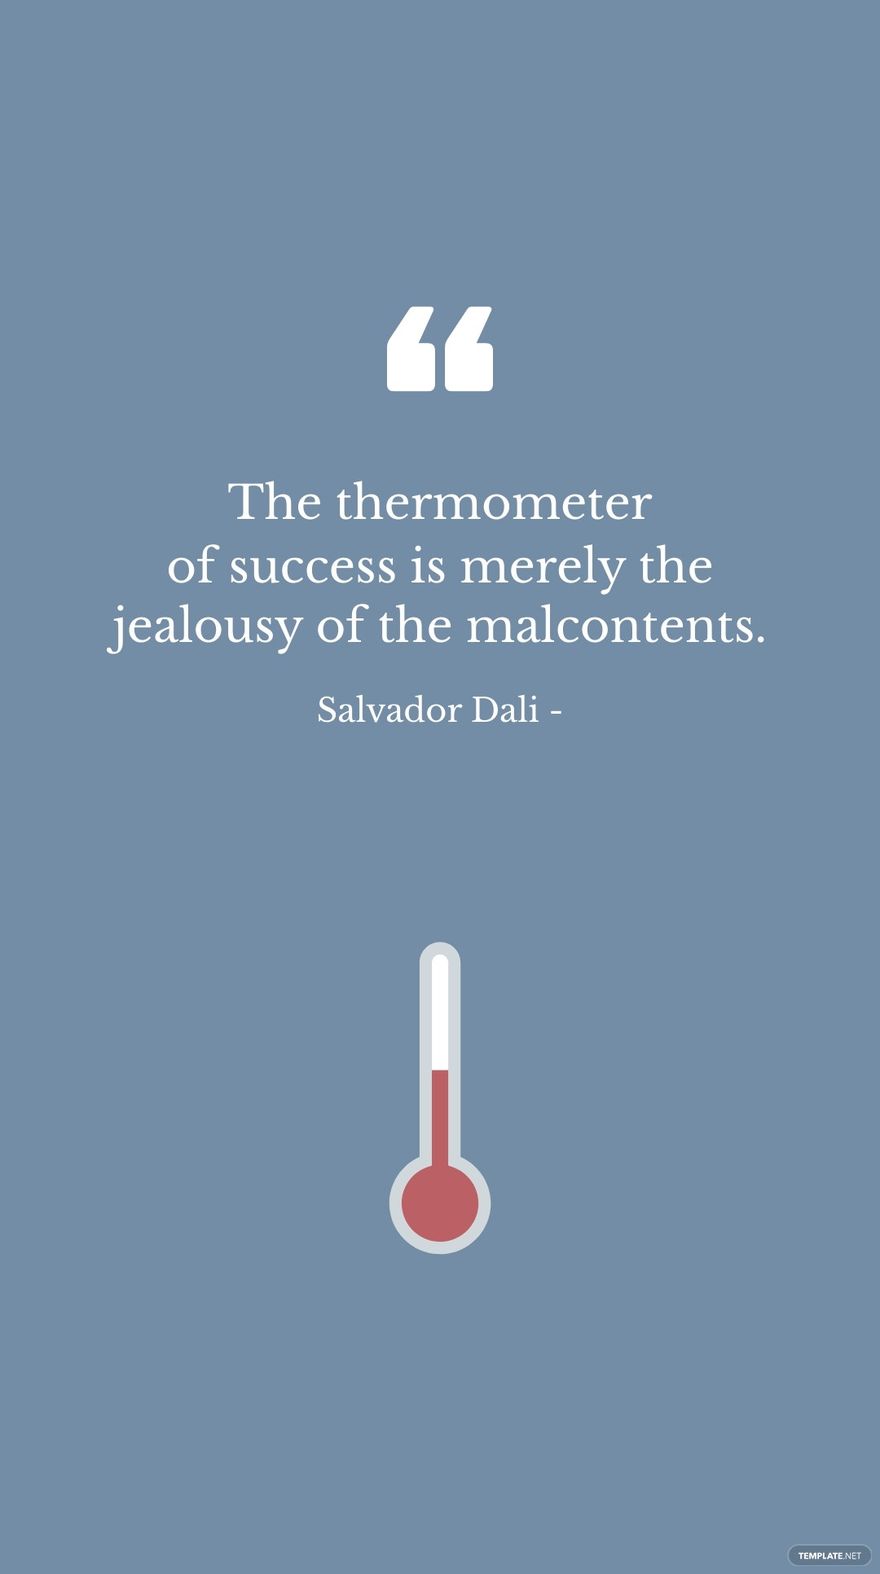 Salvador Dali - The thermometer of success is merely the jealousy of the malcontents.